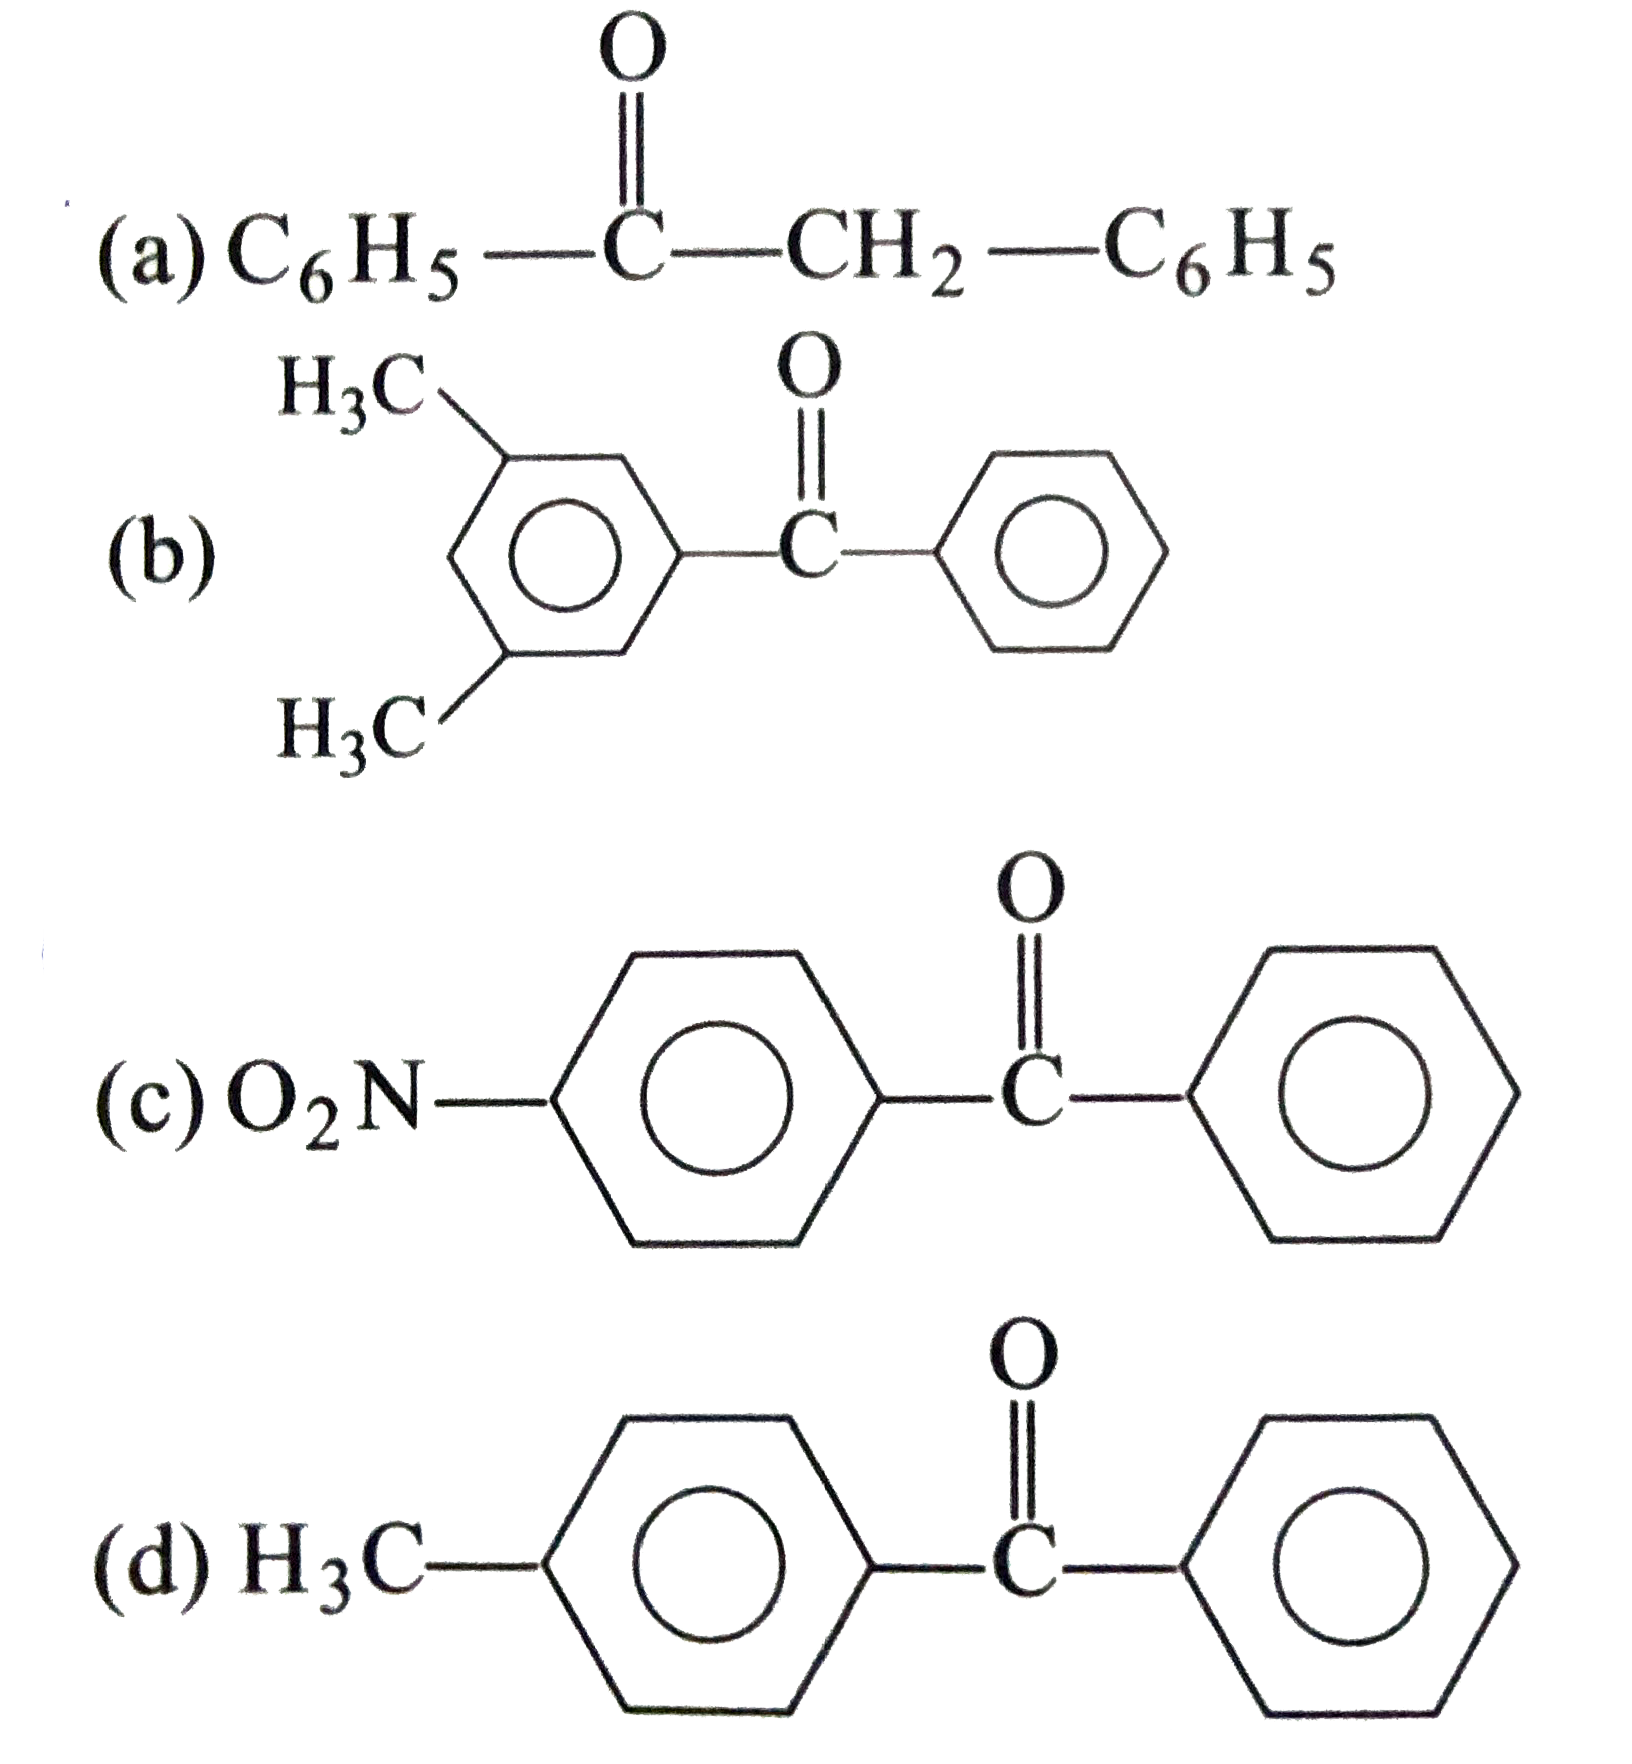 What combination of acyl chloride or acid anhyride and arene would you choice to prepare following compounds?   C(6)H(5)-overset(O)overset(||)C-CH(2)-C(6)H(5)